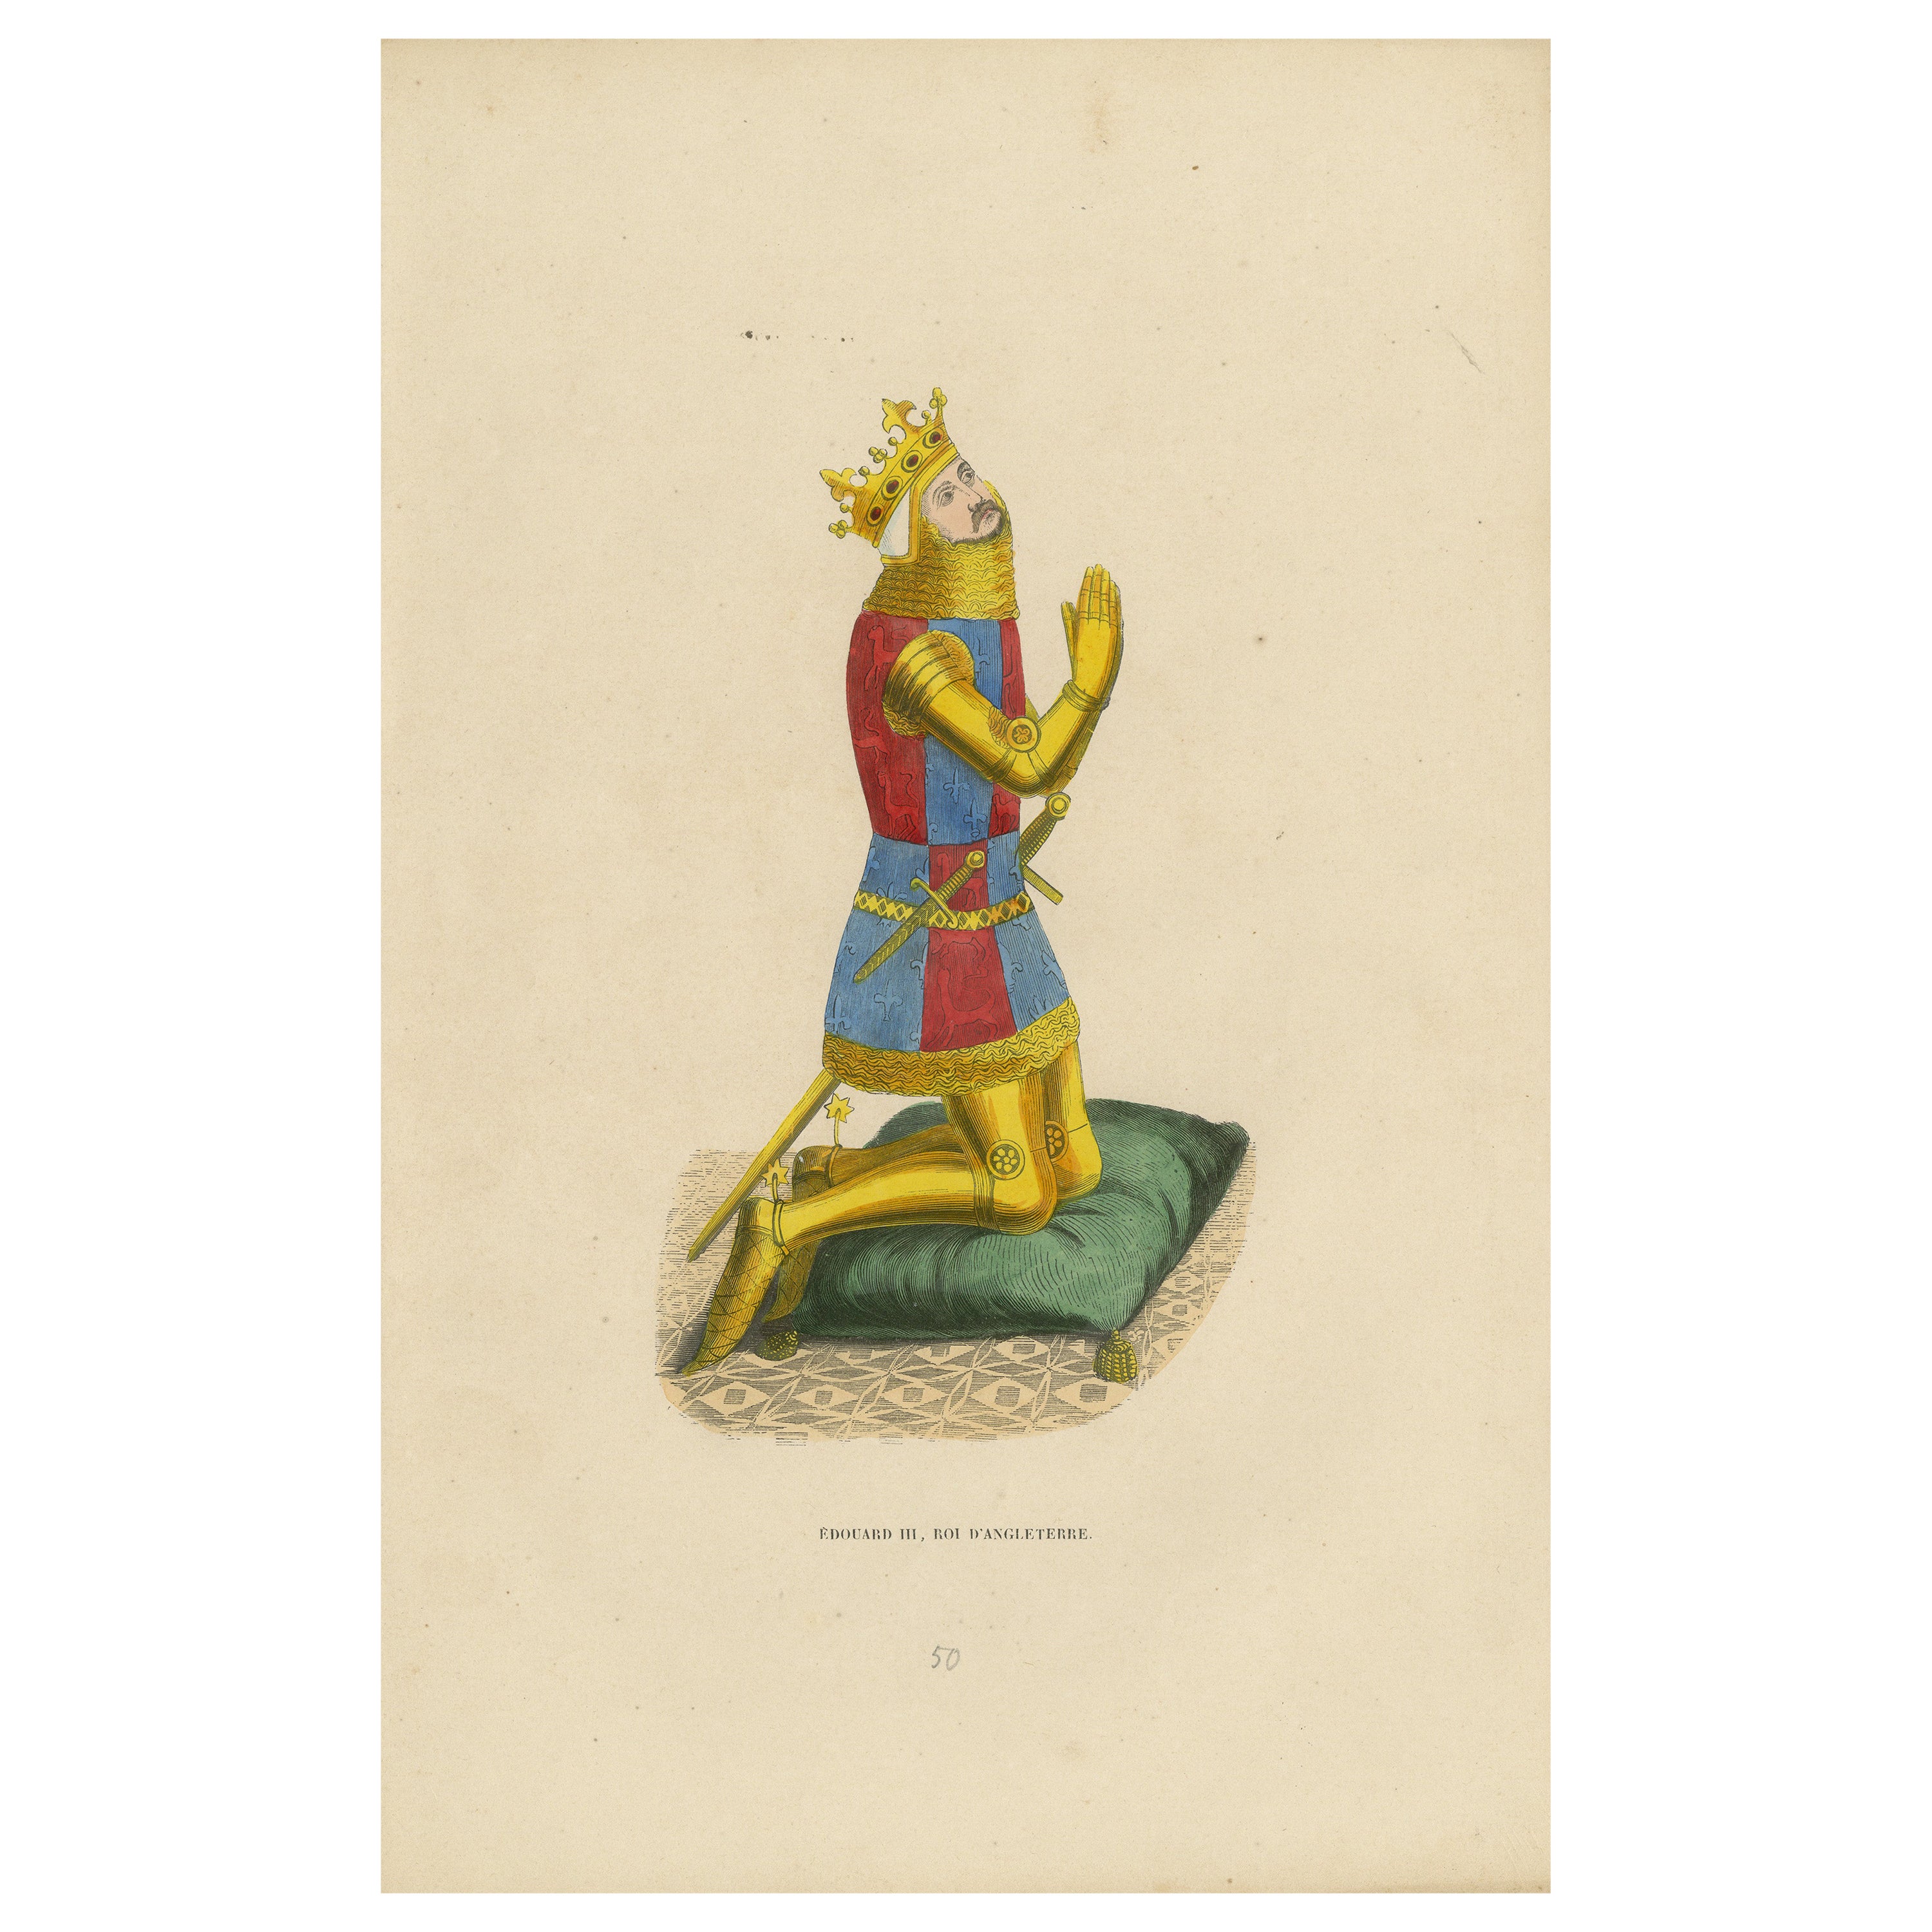 Devotion of a Monarch: Edward III in Prayerful Pose, A Lithograph of 1847